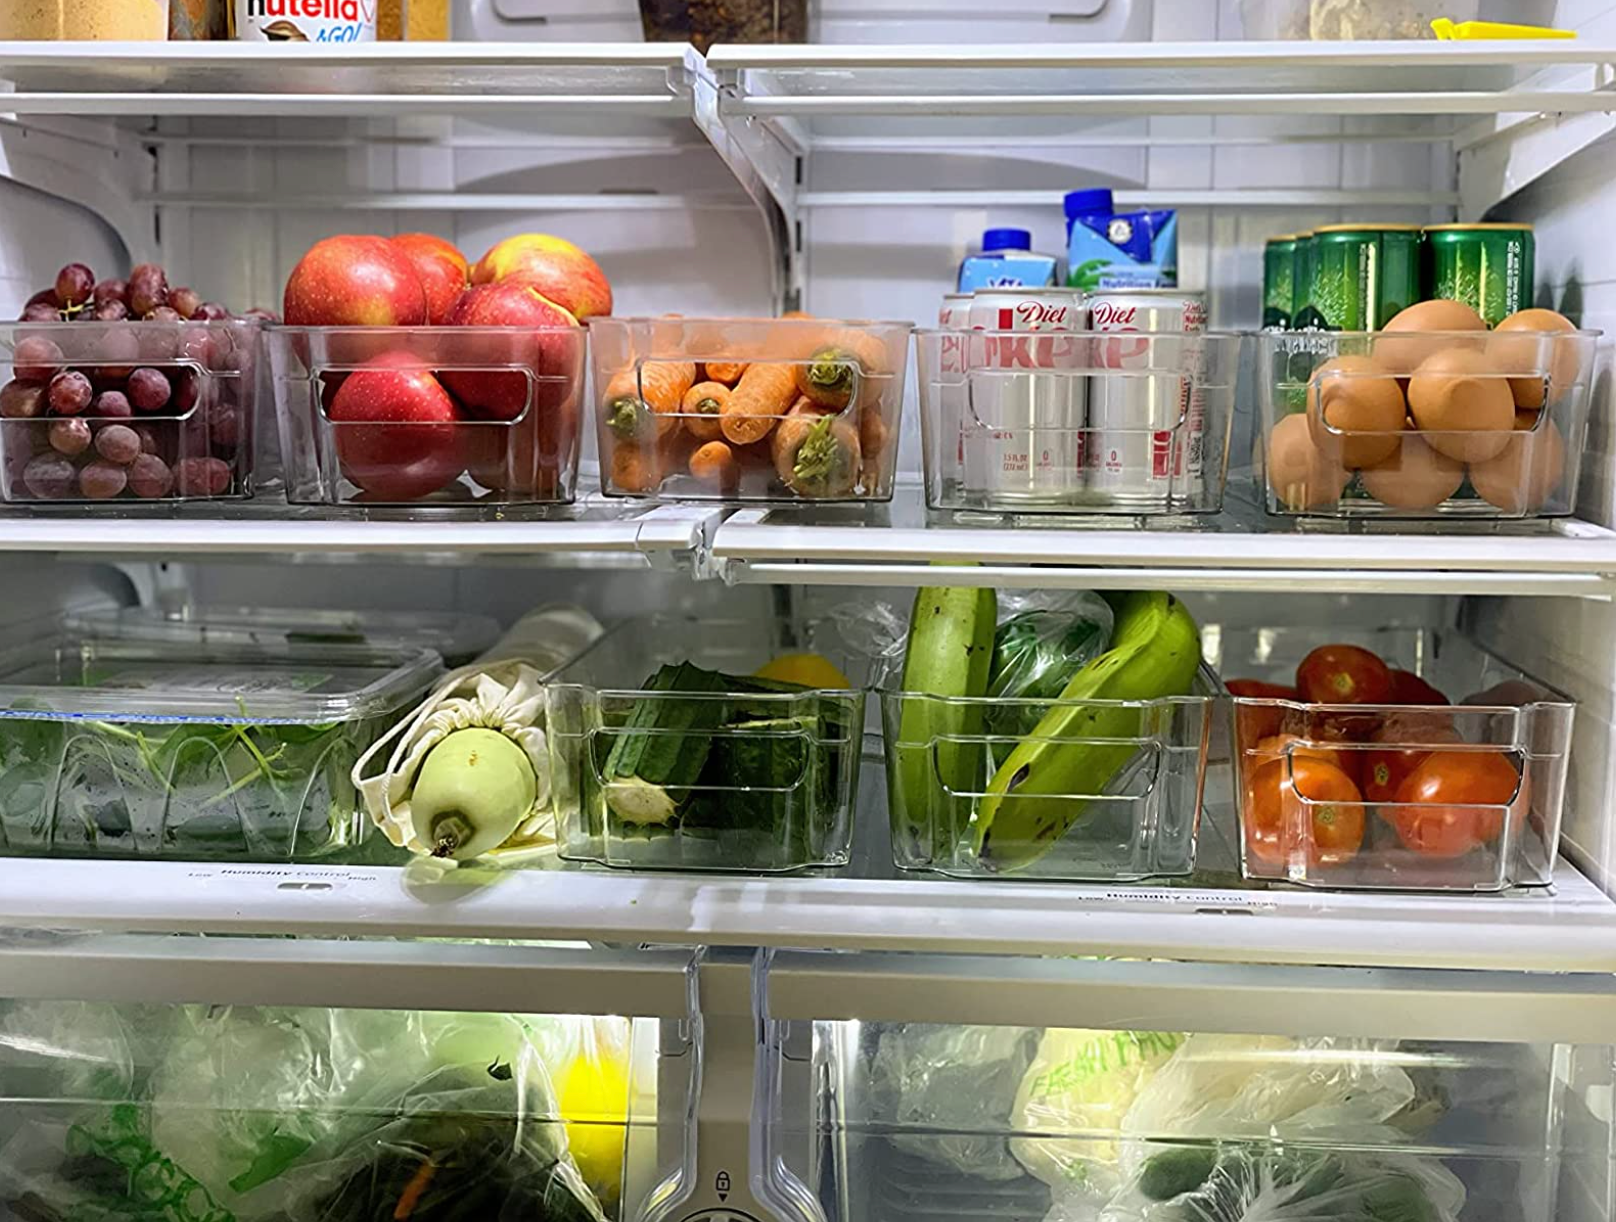 Reviewer image of clear plastic bins with handles on them and fruit inside in a fridge 